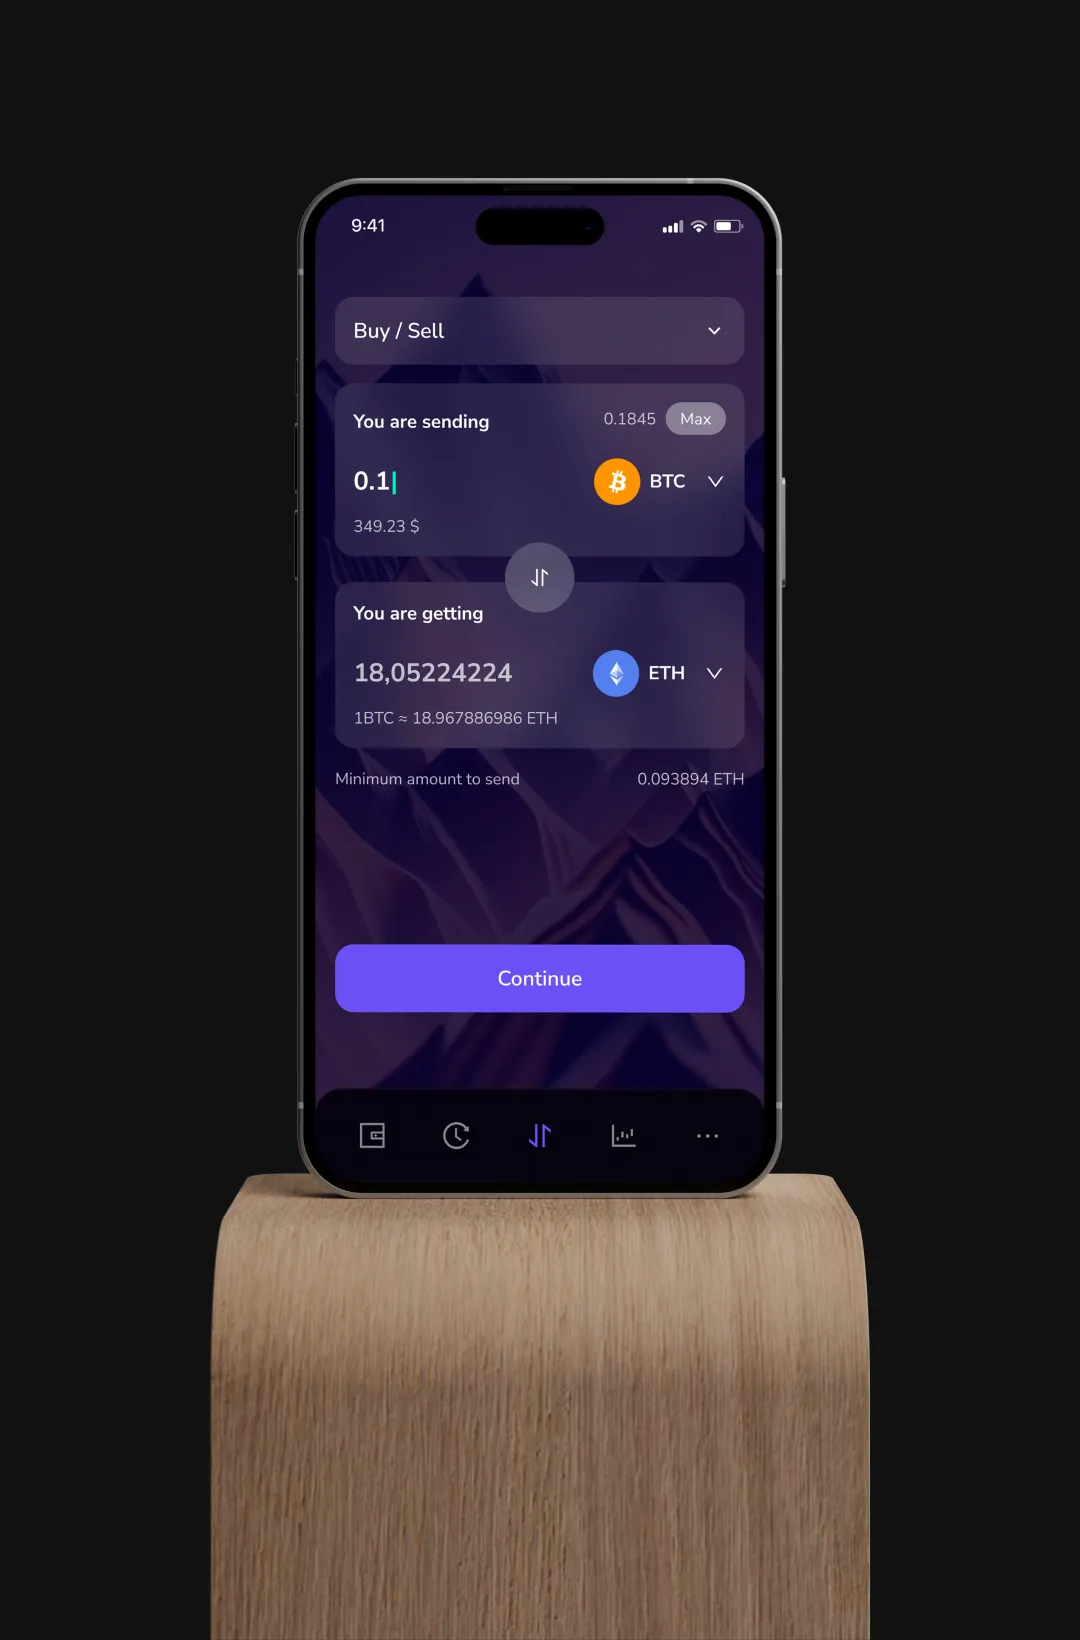 White Label Cryptocurrency Wallet App Development